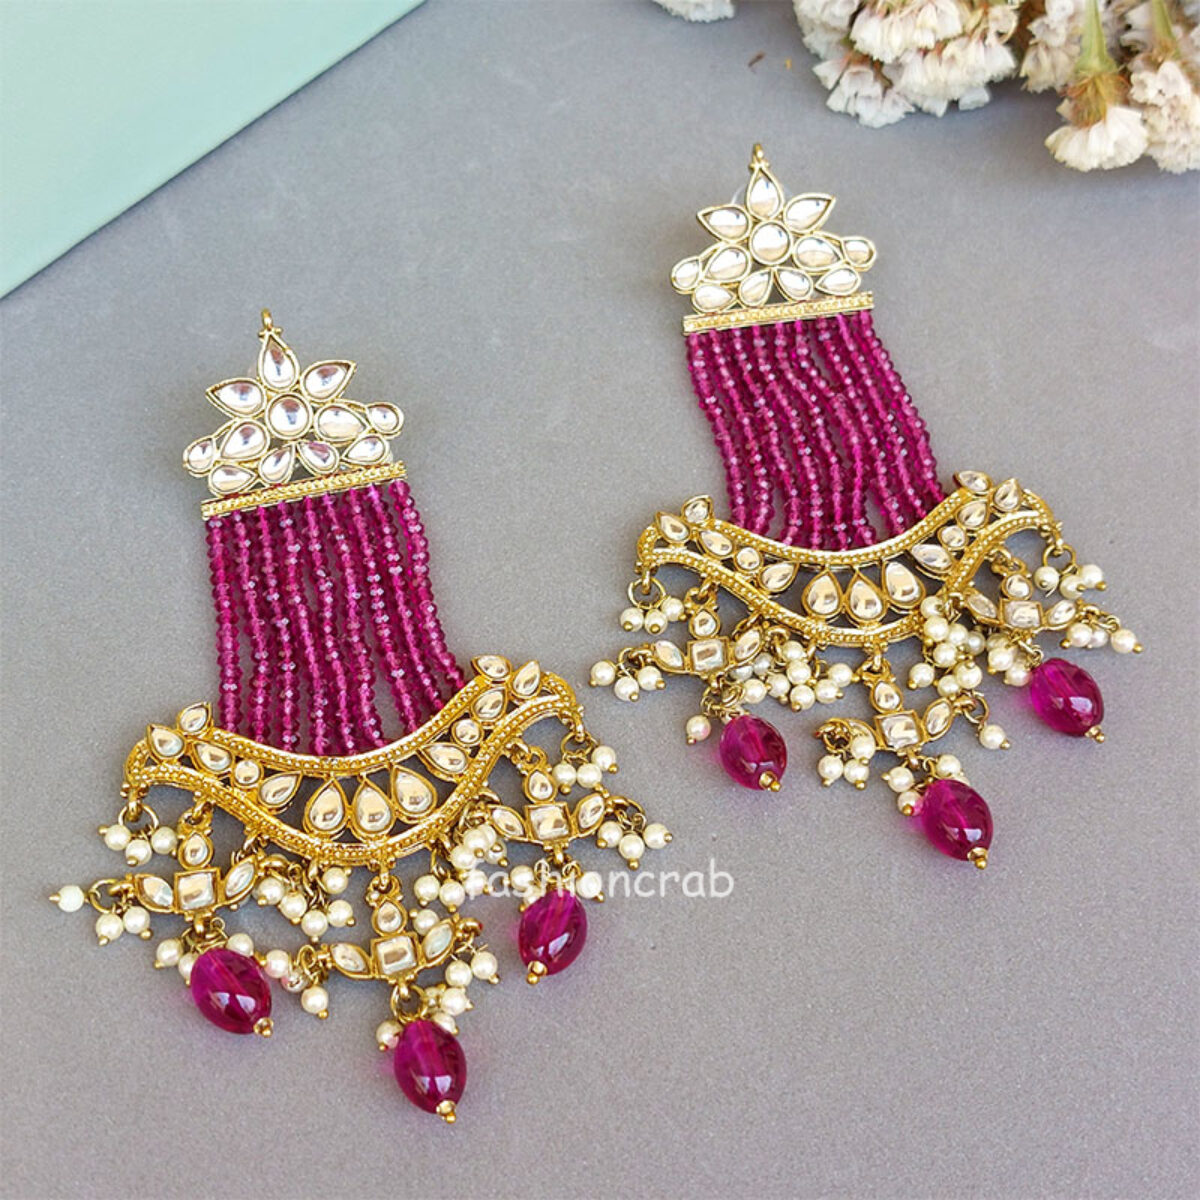 Vintage Geometry Resin Wine Colour Earrings 66 Styles In Gold For Womens  Banquets And Parties From Donet, $1.23 | DHgate.Com